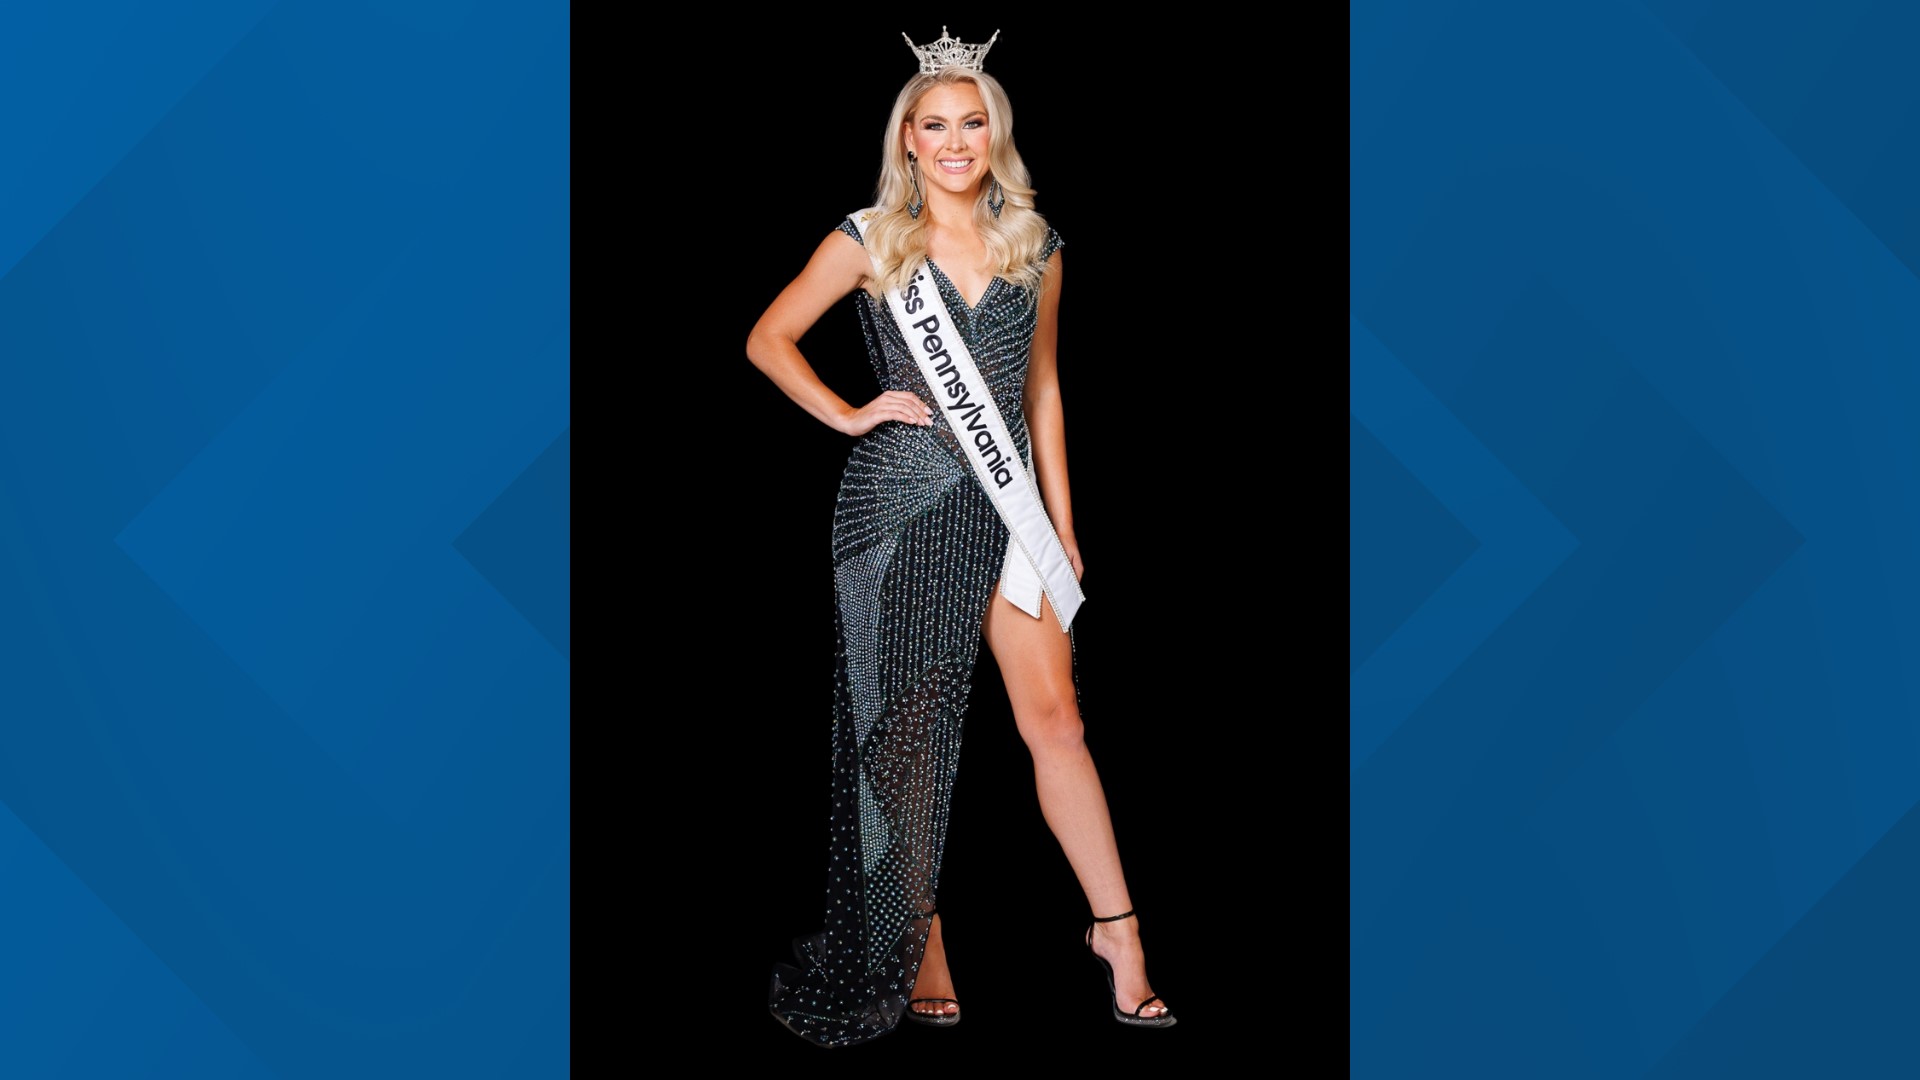 Miss Pennsylvania prepares to head to Miss America competition